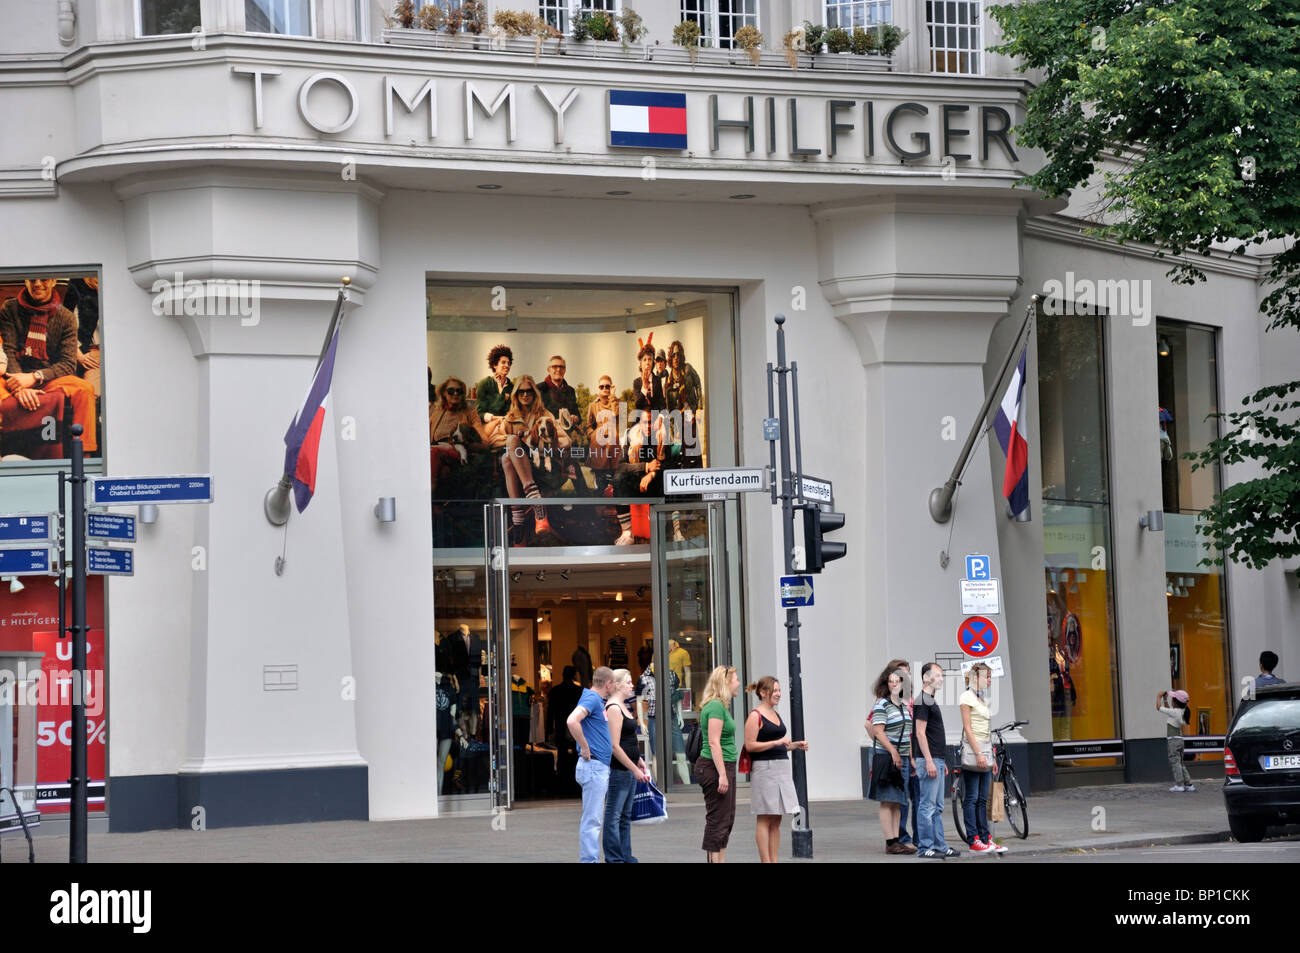 Tommy hilfiger retail store hi-res stock photography and images - Alamy